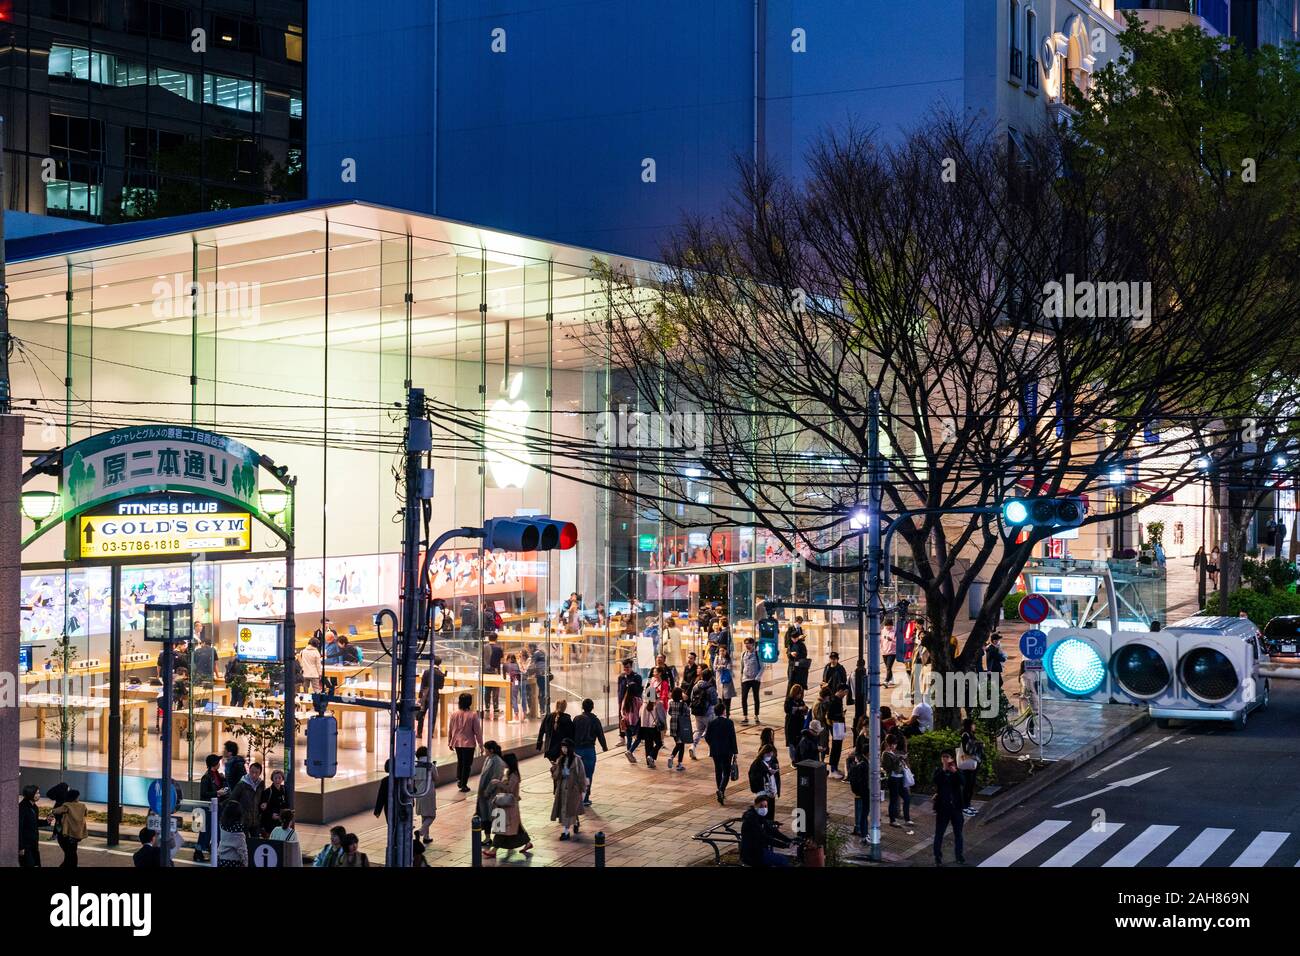 Exterior of the glass facade of the Apple store at Omotesando, Tokyo. Night time, pavement busy with shoppers, green traffic light in foreground. Stock Photo